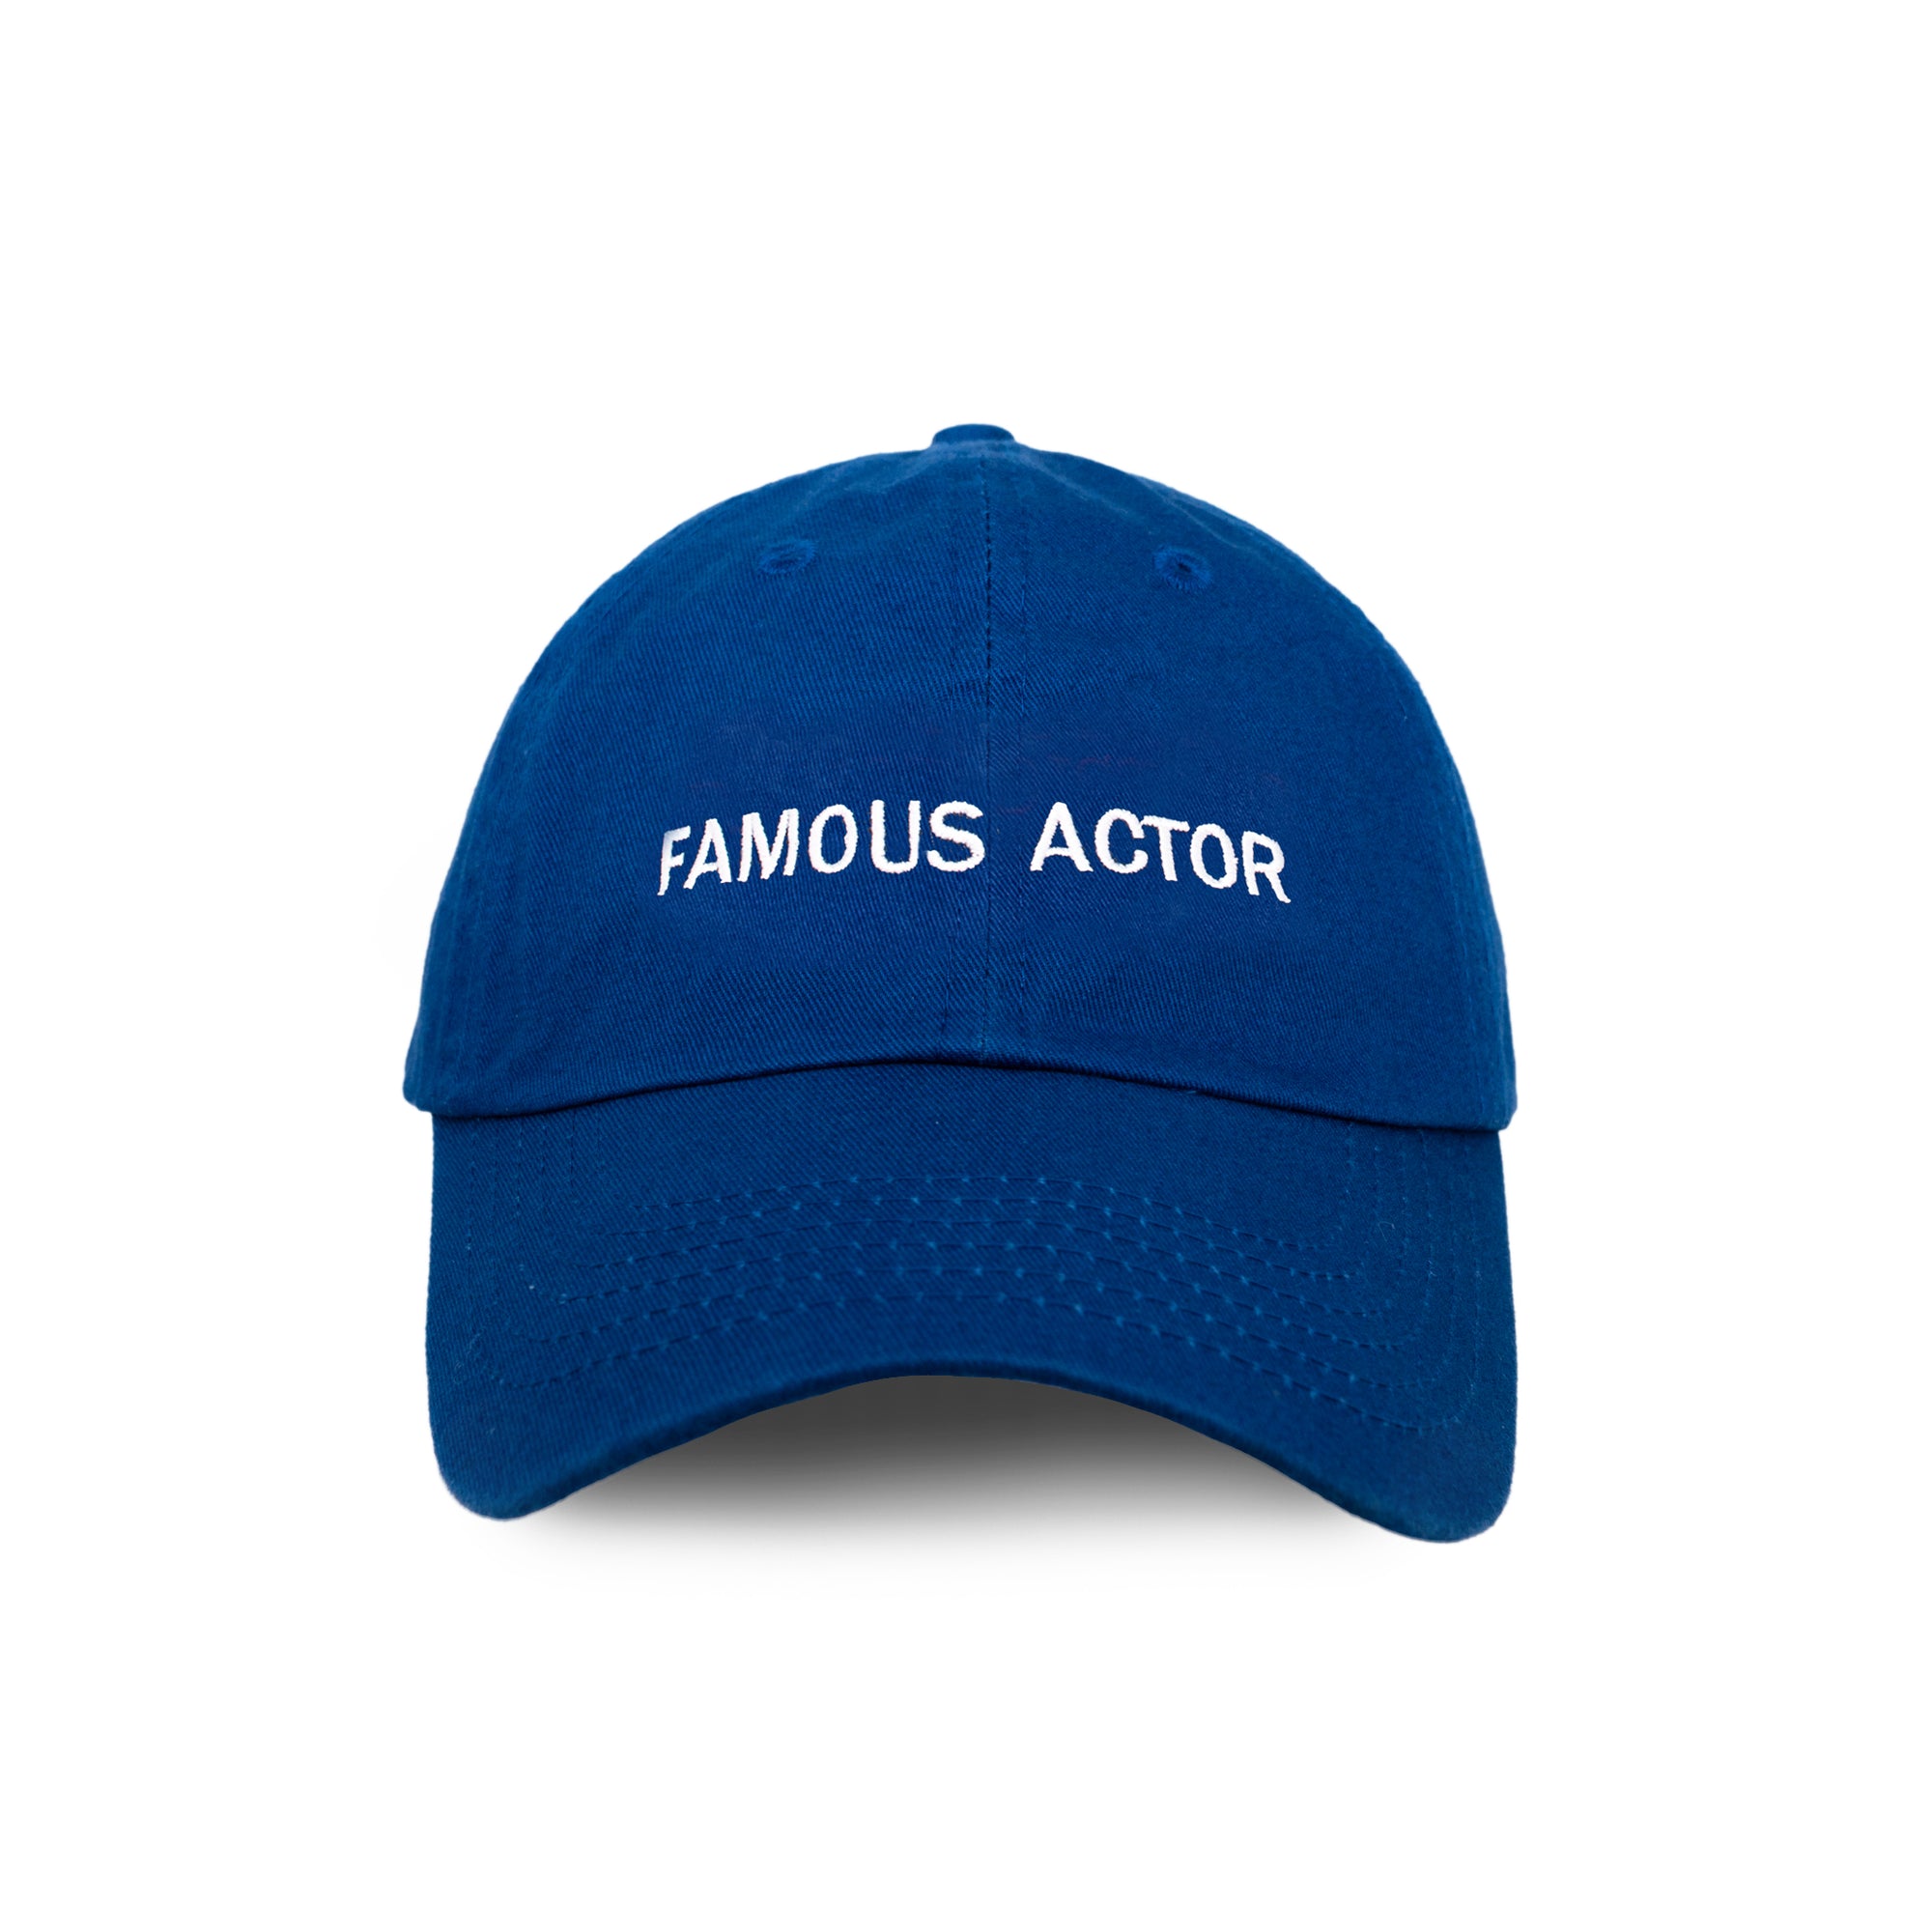 FAMOUS ACTOR